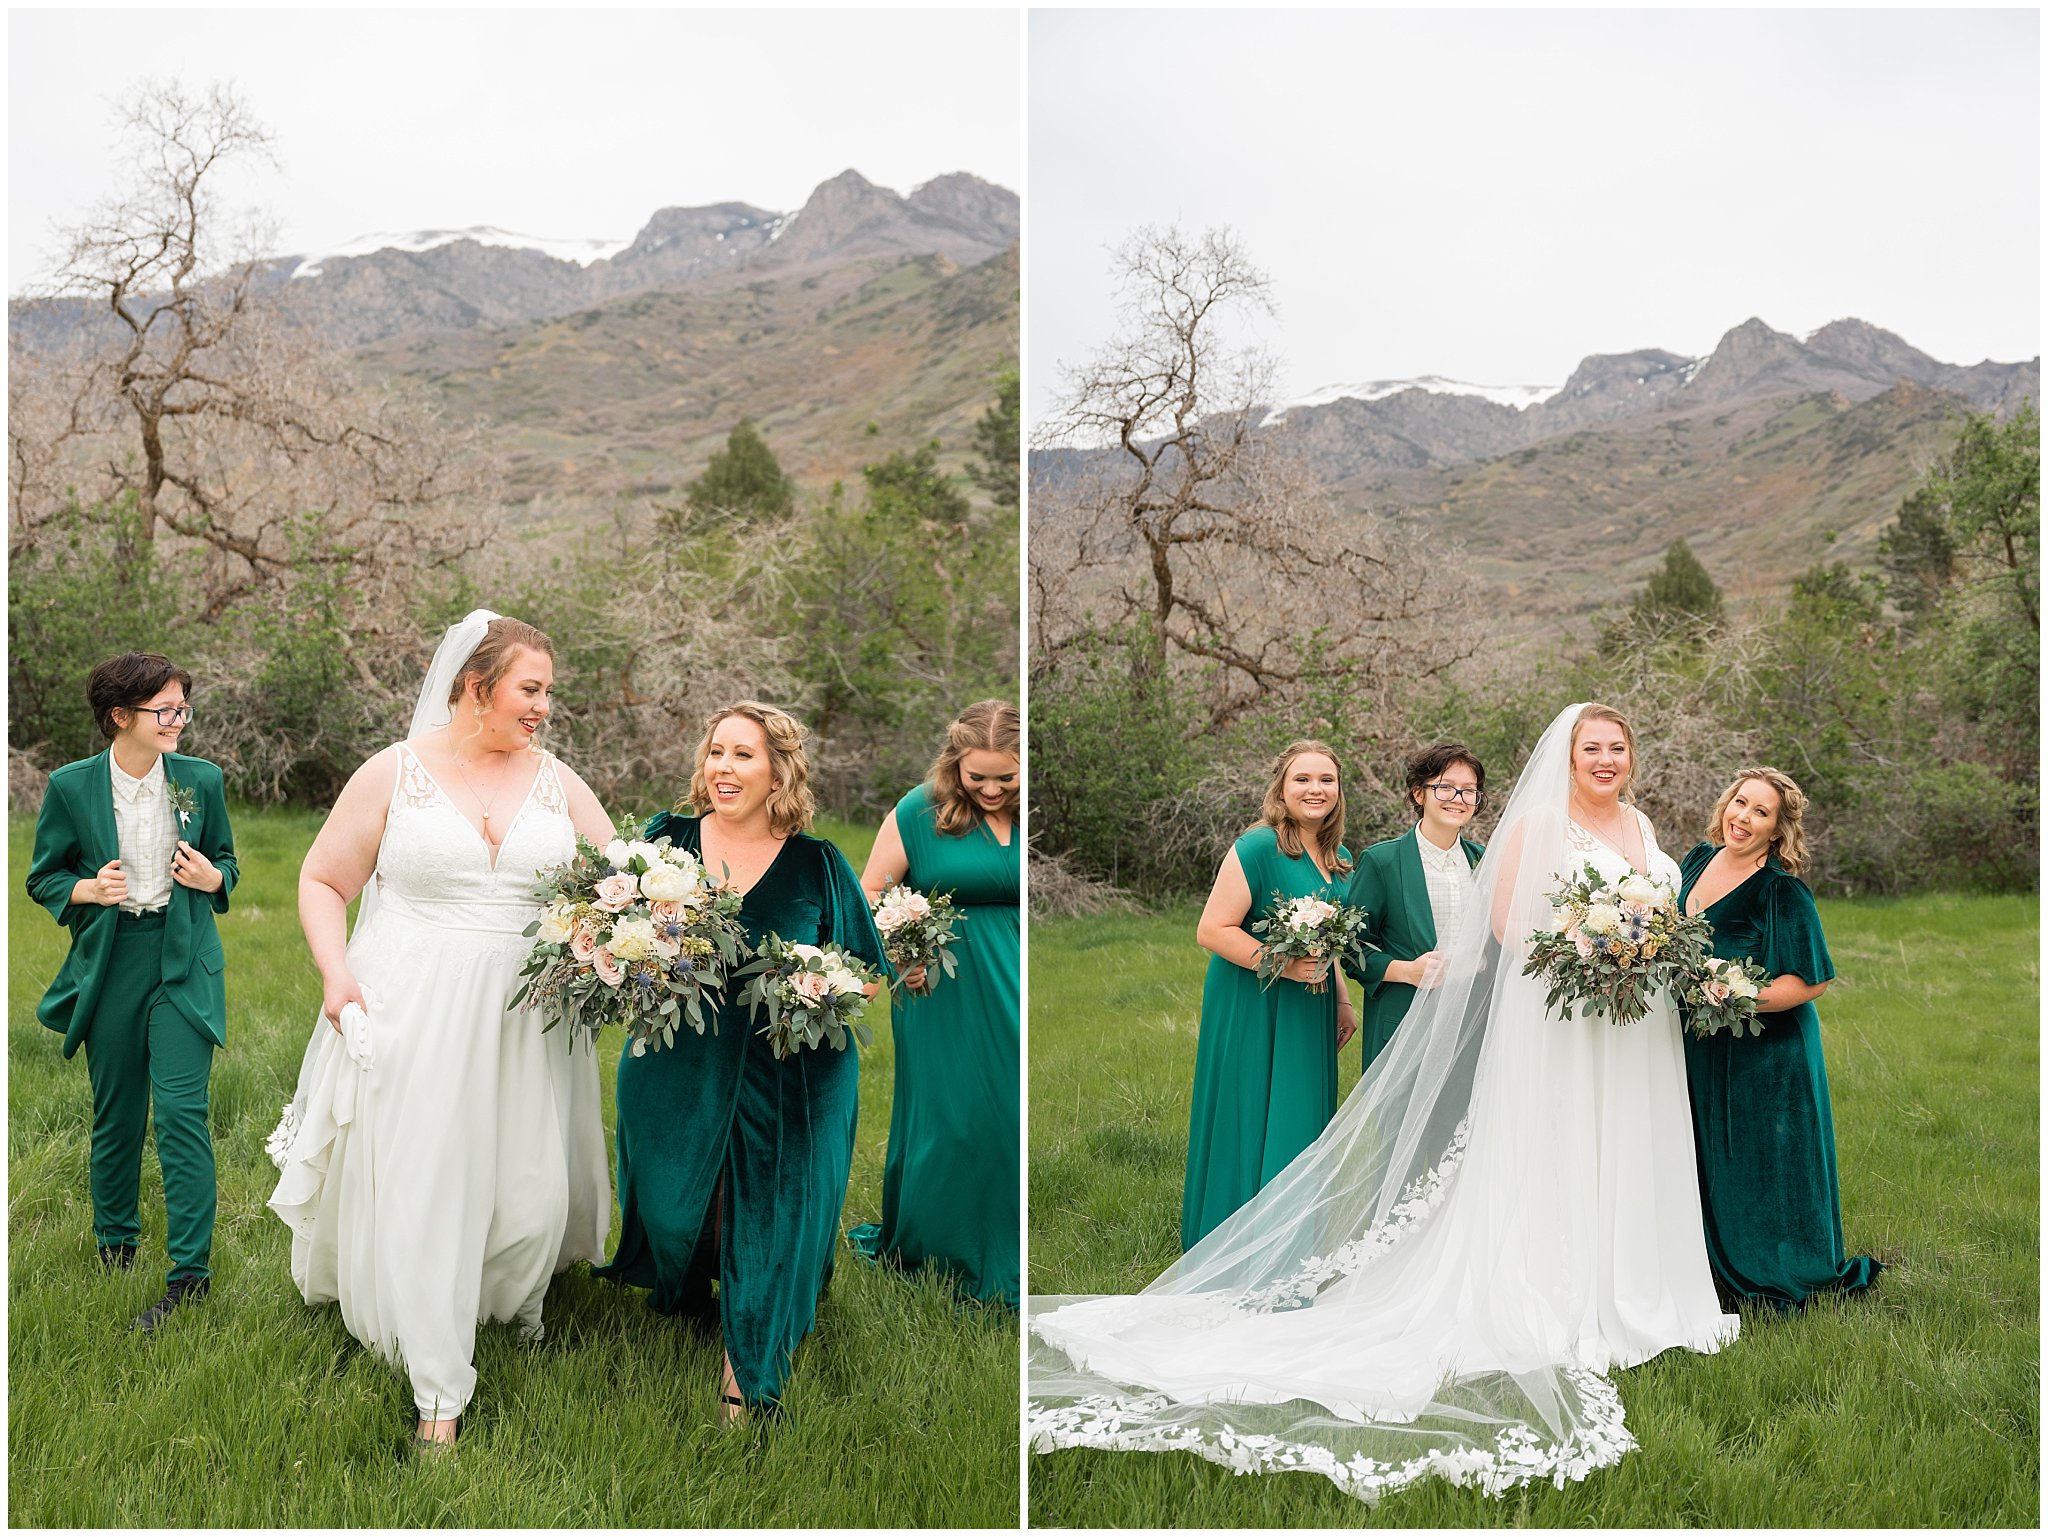 Wedding party portraits in the mountains | Spring Mountain Wedding at Oak Hills Utah